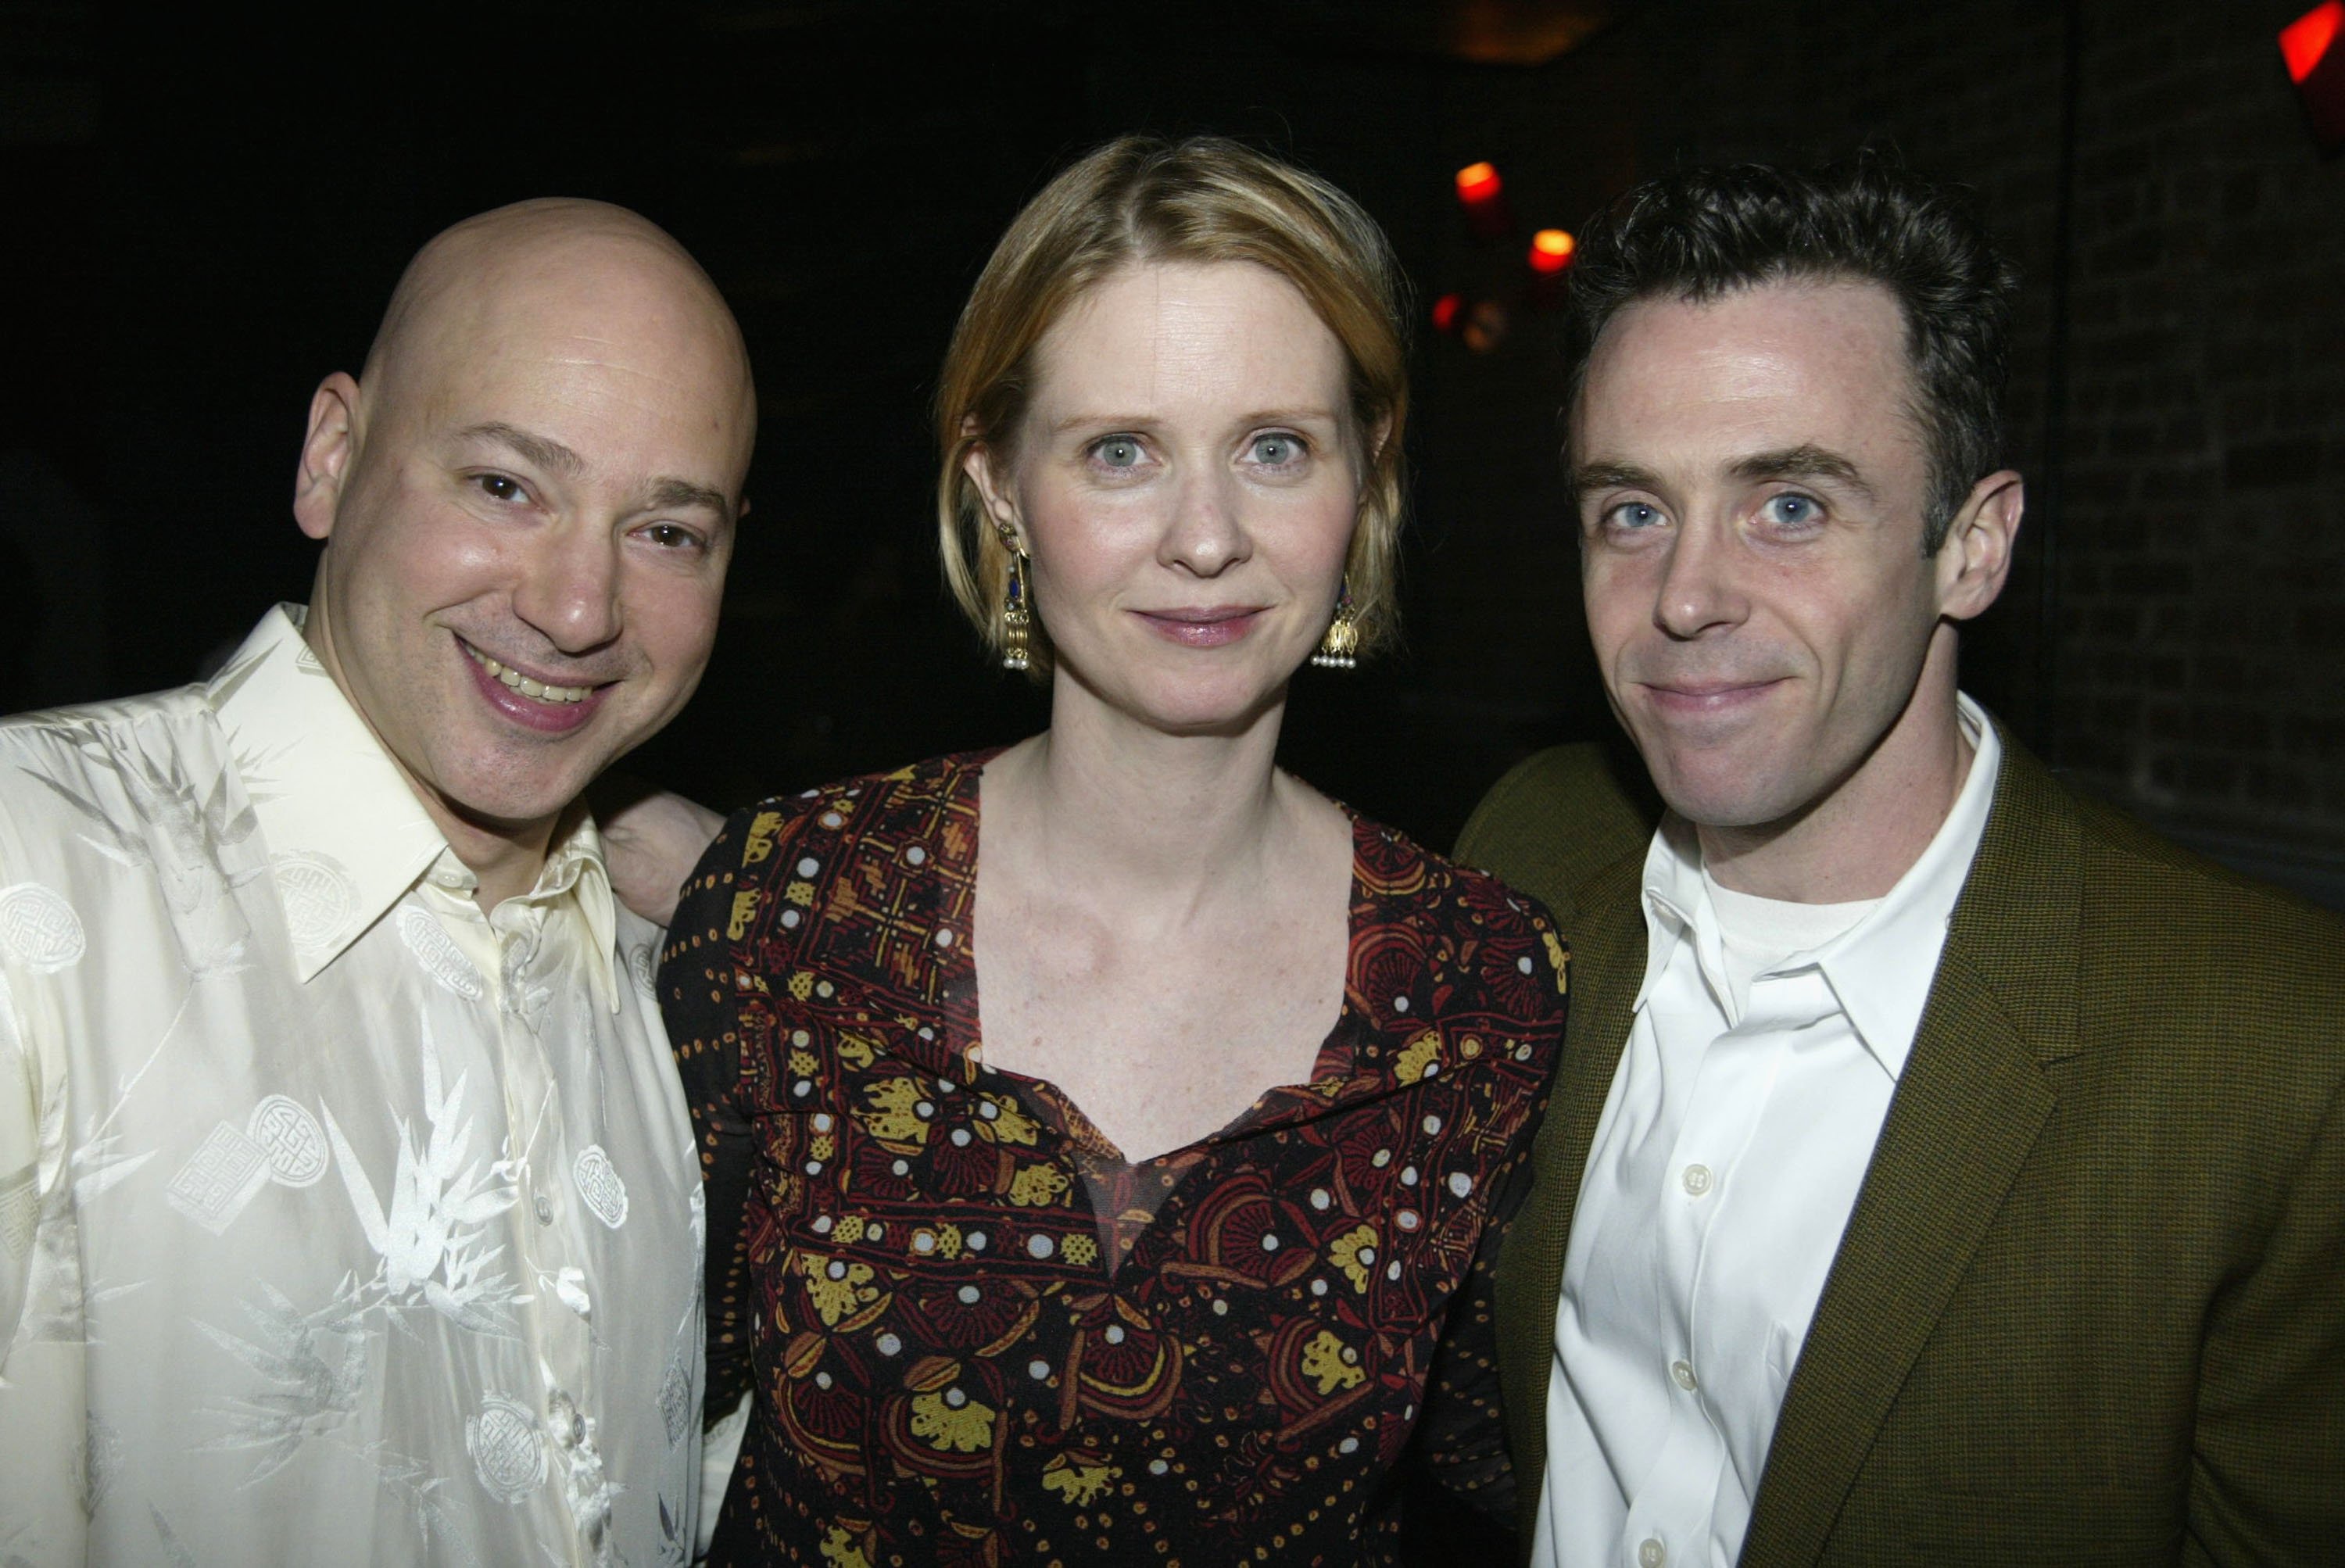 Evan Handler, Cynthia Nixon and David Eigenberg pose for a photyo together at the opening night party for 'String Fever' in New York City